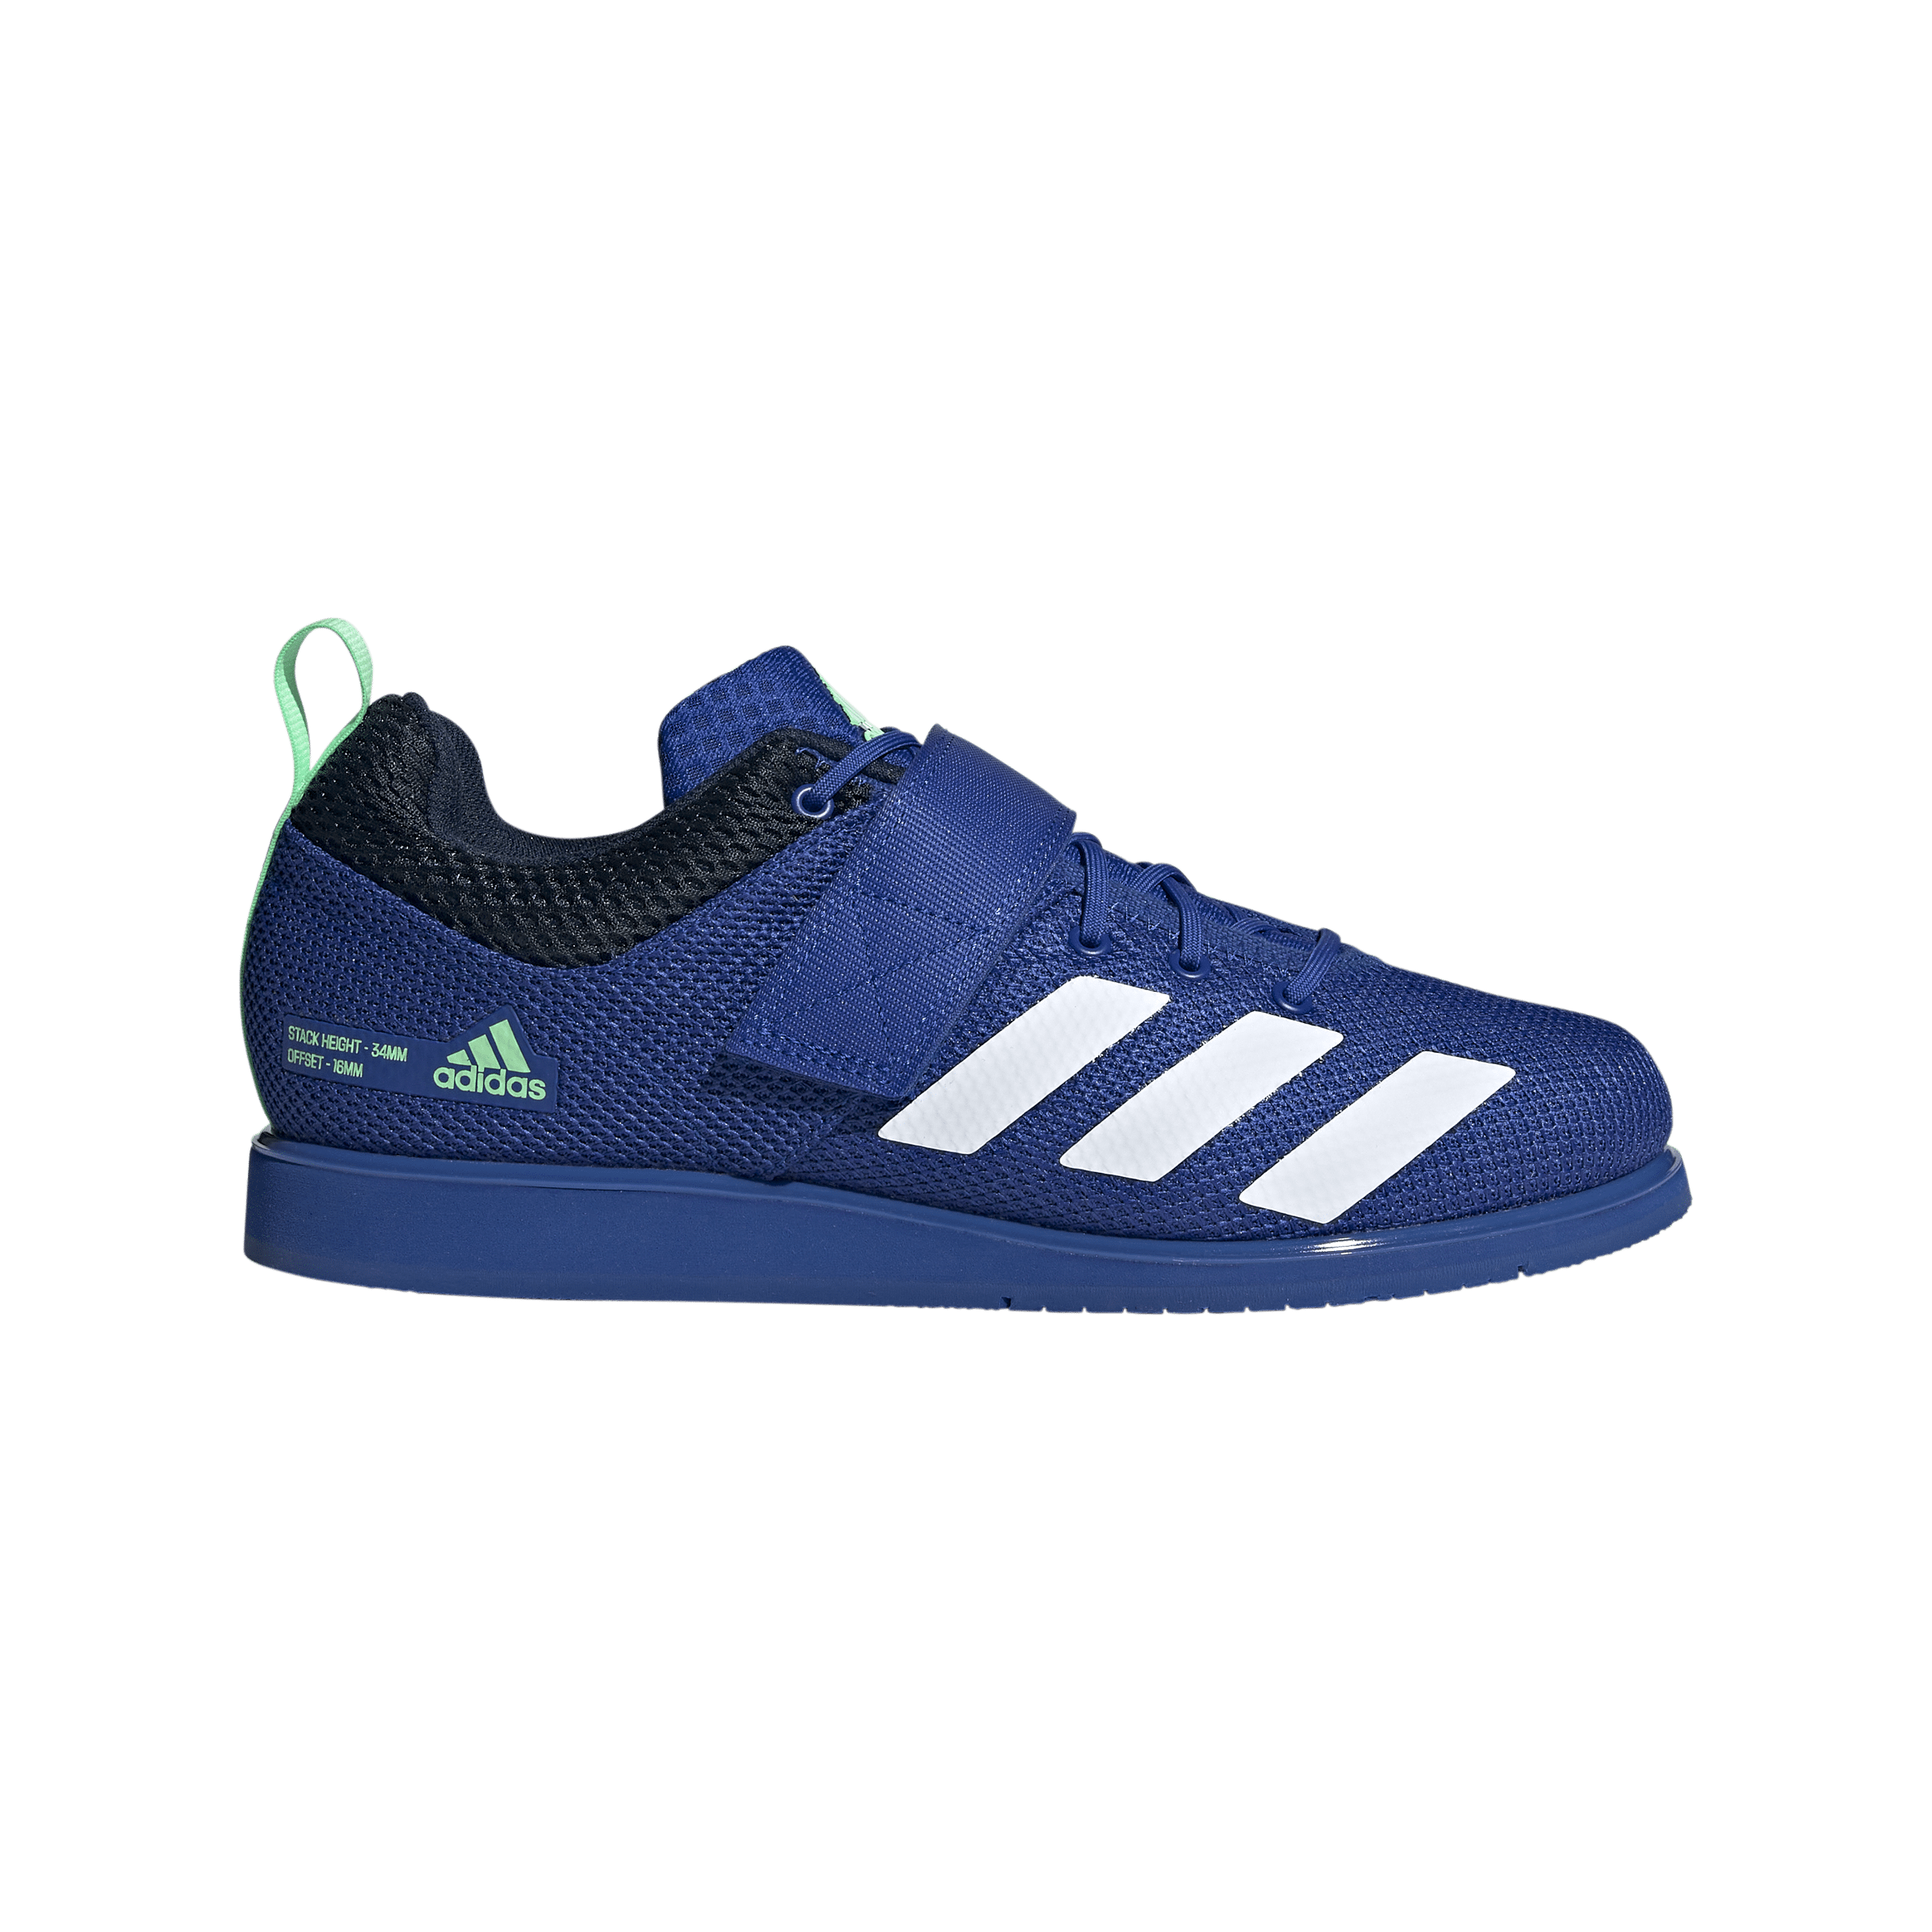 Adidas Powerlift 5 Lifting Shoes in Royal Blue - WIT Fitness